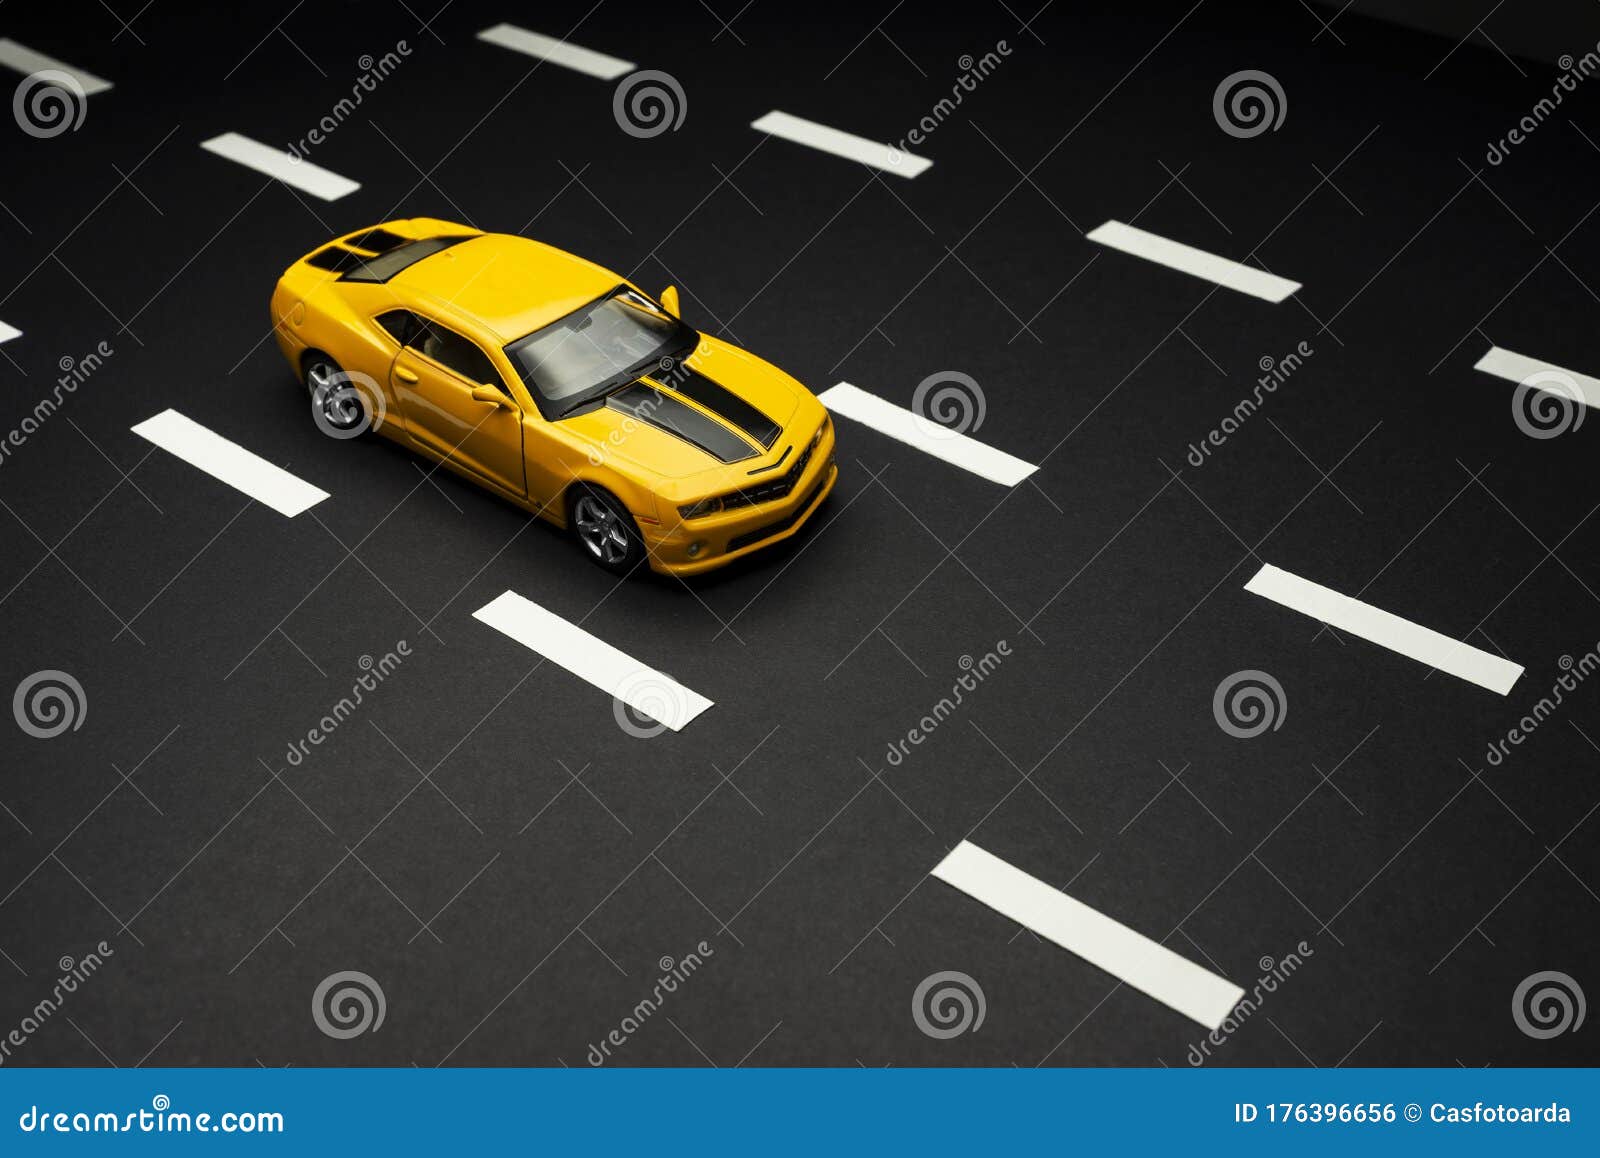 Yellow Toy Sports Car With Two Doors On A Black Background Editorial Photo Image Of Style Editorial 176396656